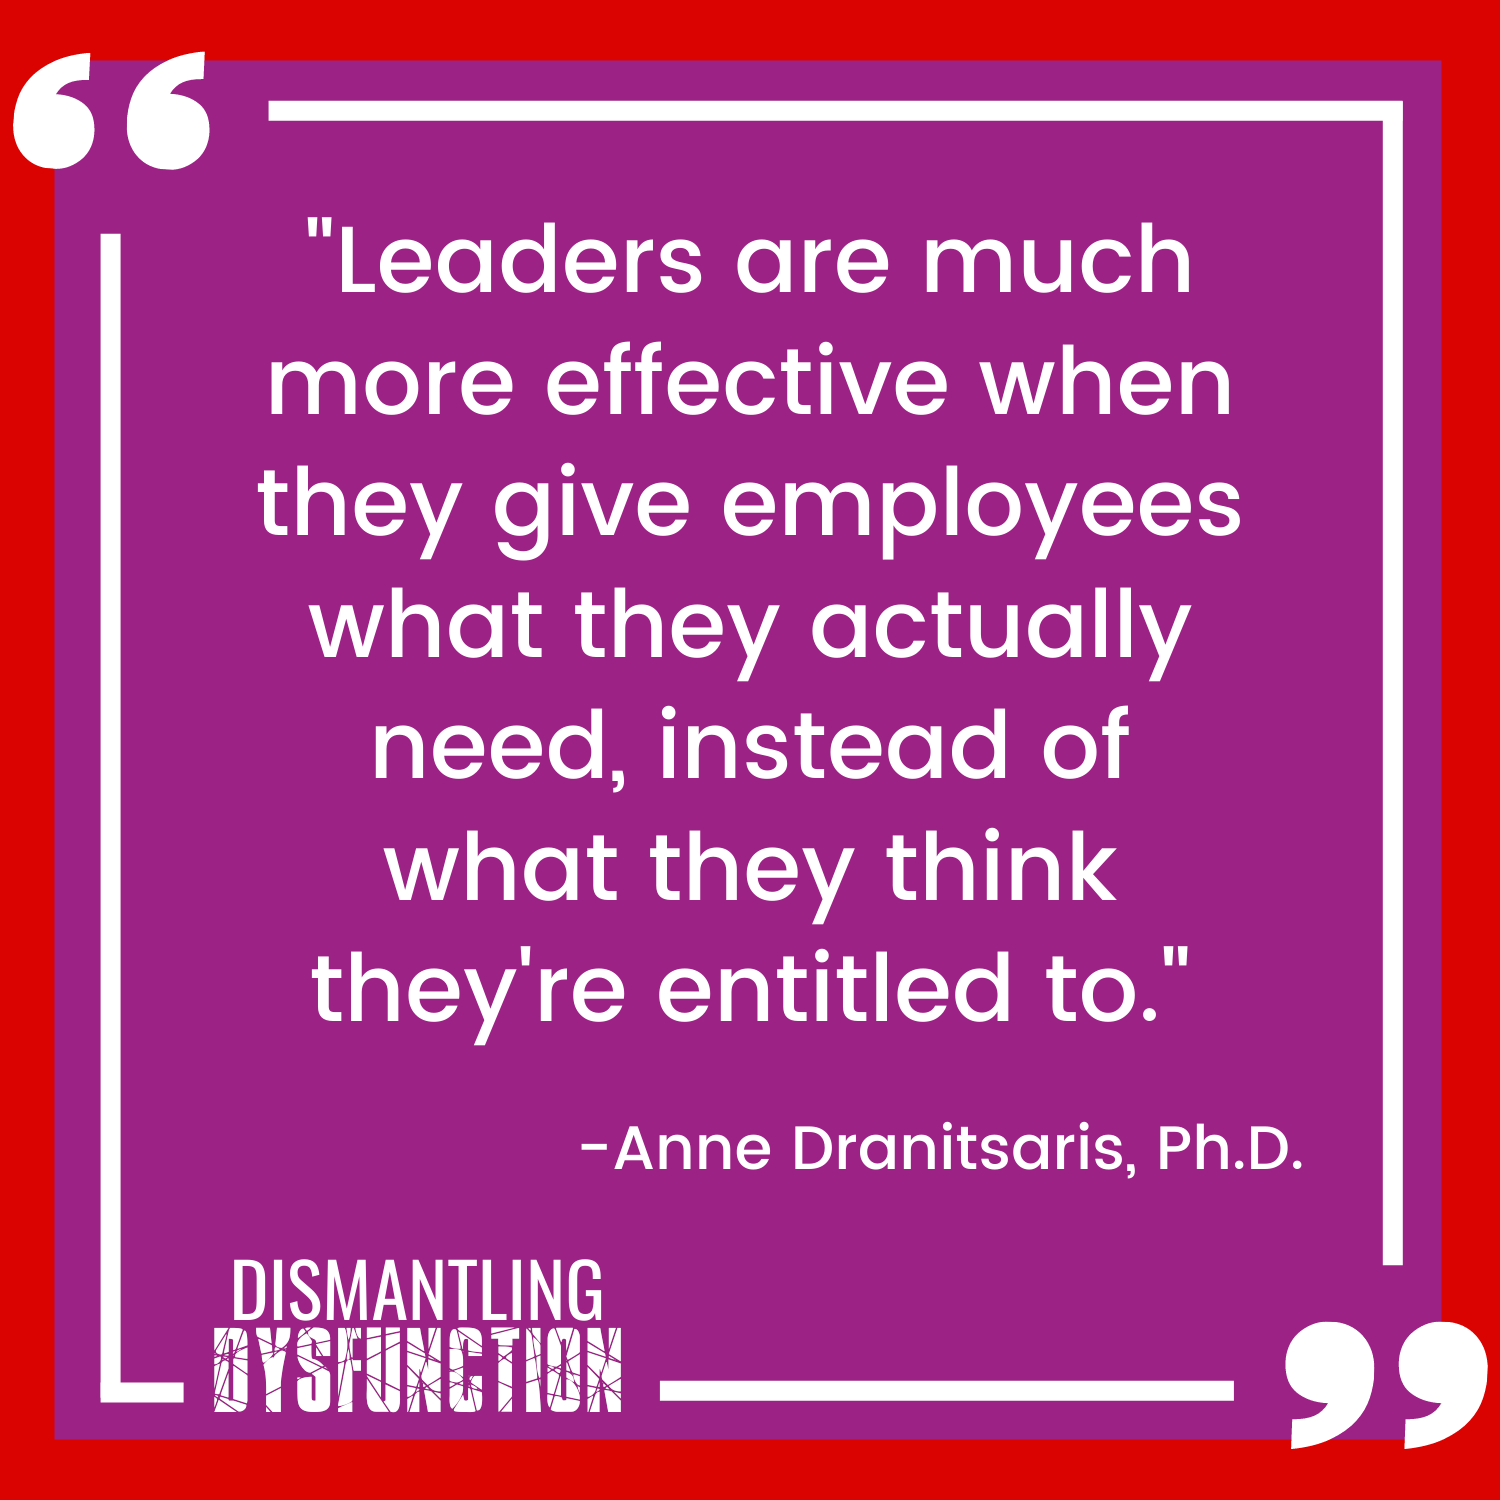 "Leaders are much more effective when they give employees what they actually need, instead of what they think they're entitled to."